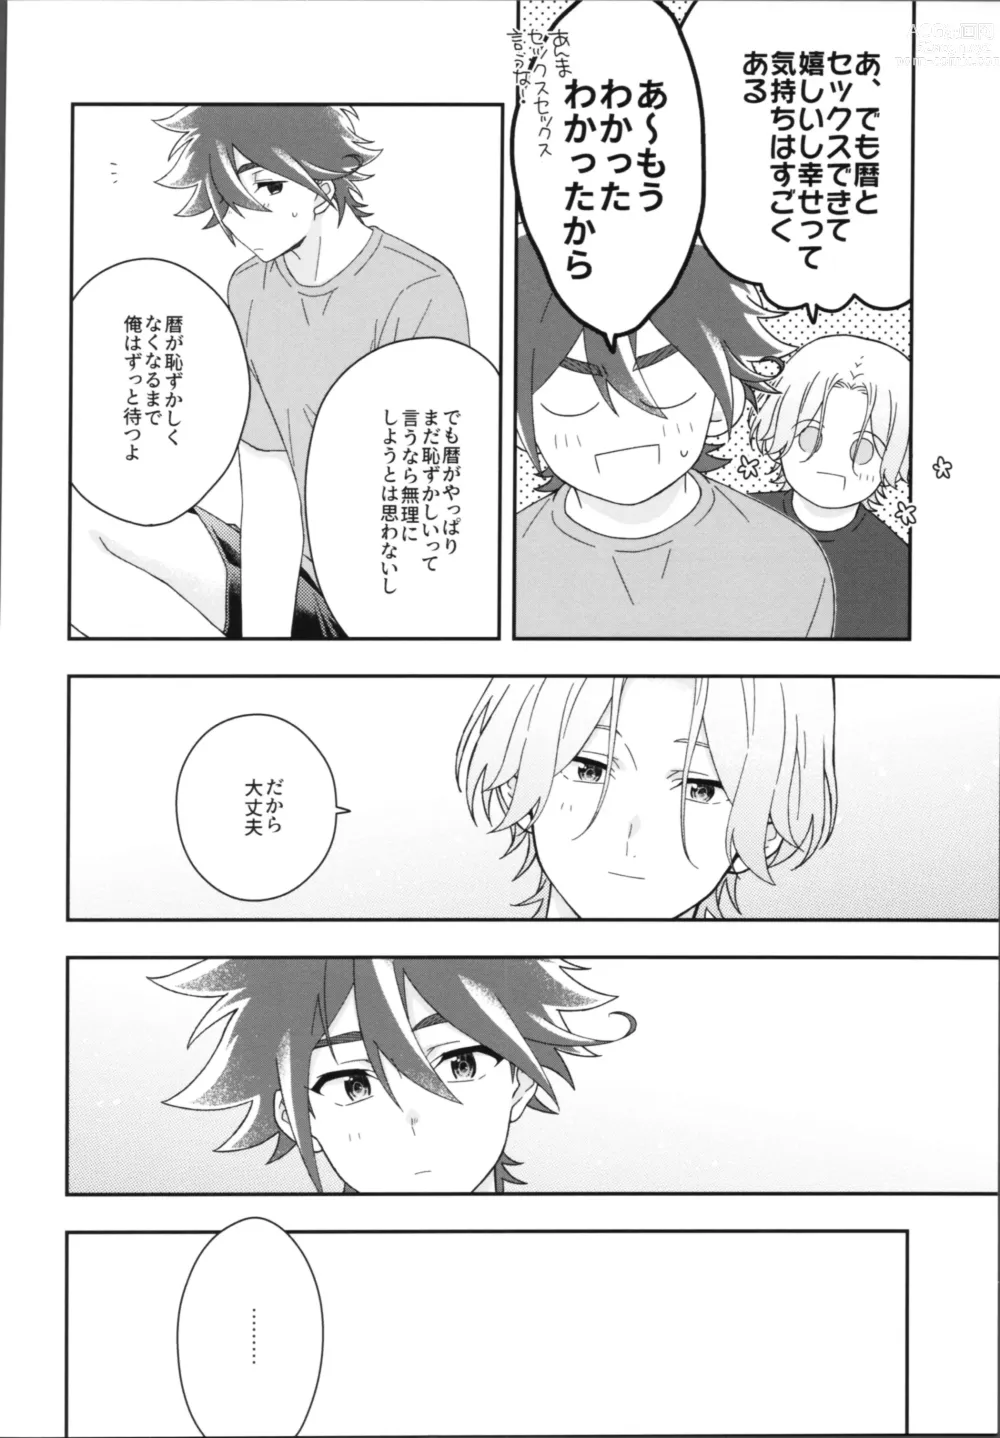 Page 7 of doujinshi HOME SWEET HOME